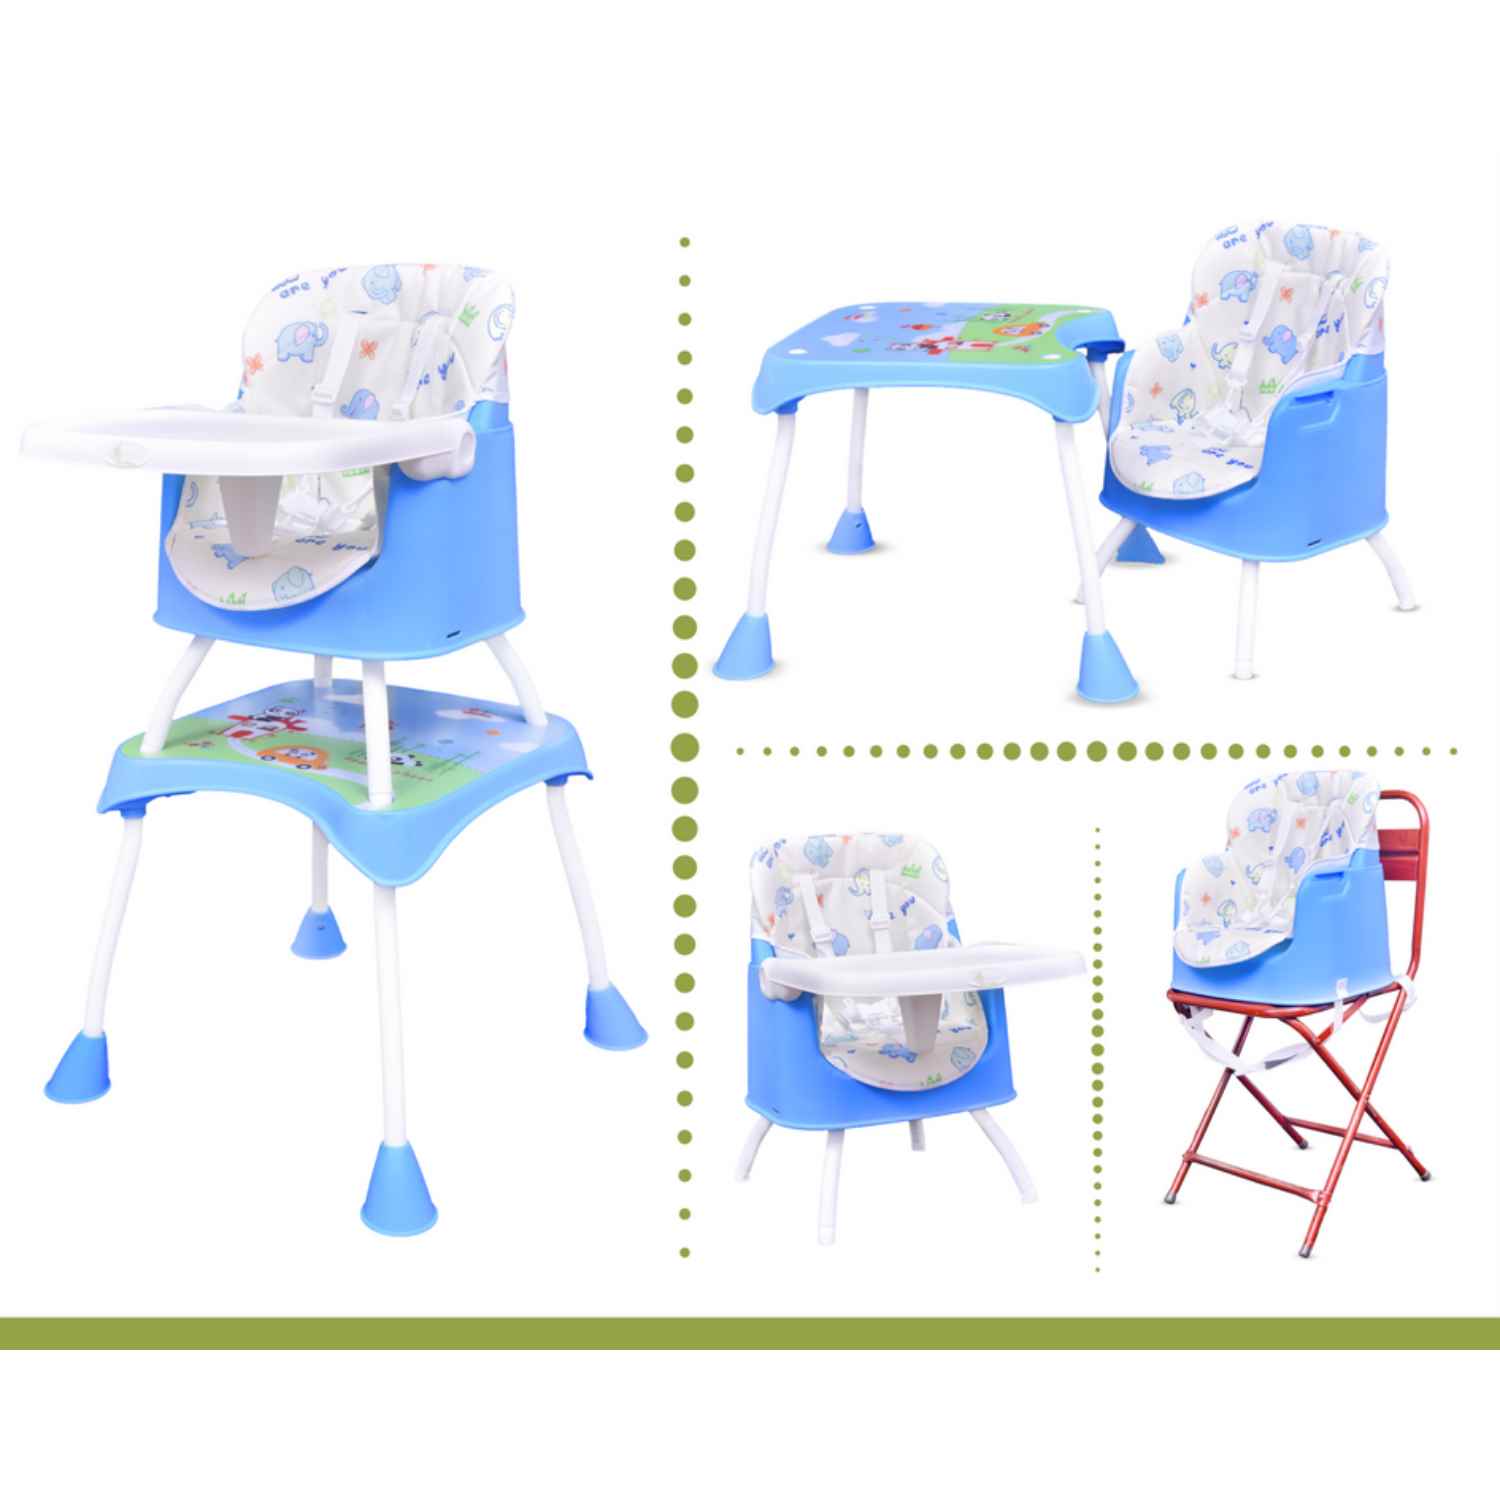 R FOR RABBIT Cherry Berry Grand Convertible 4 in 1 Feeding High Chair for Baby of 6 Month to 7 years